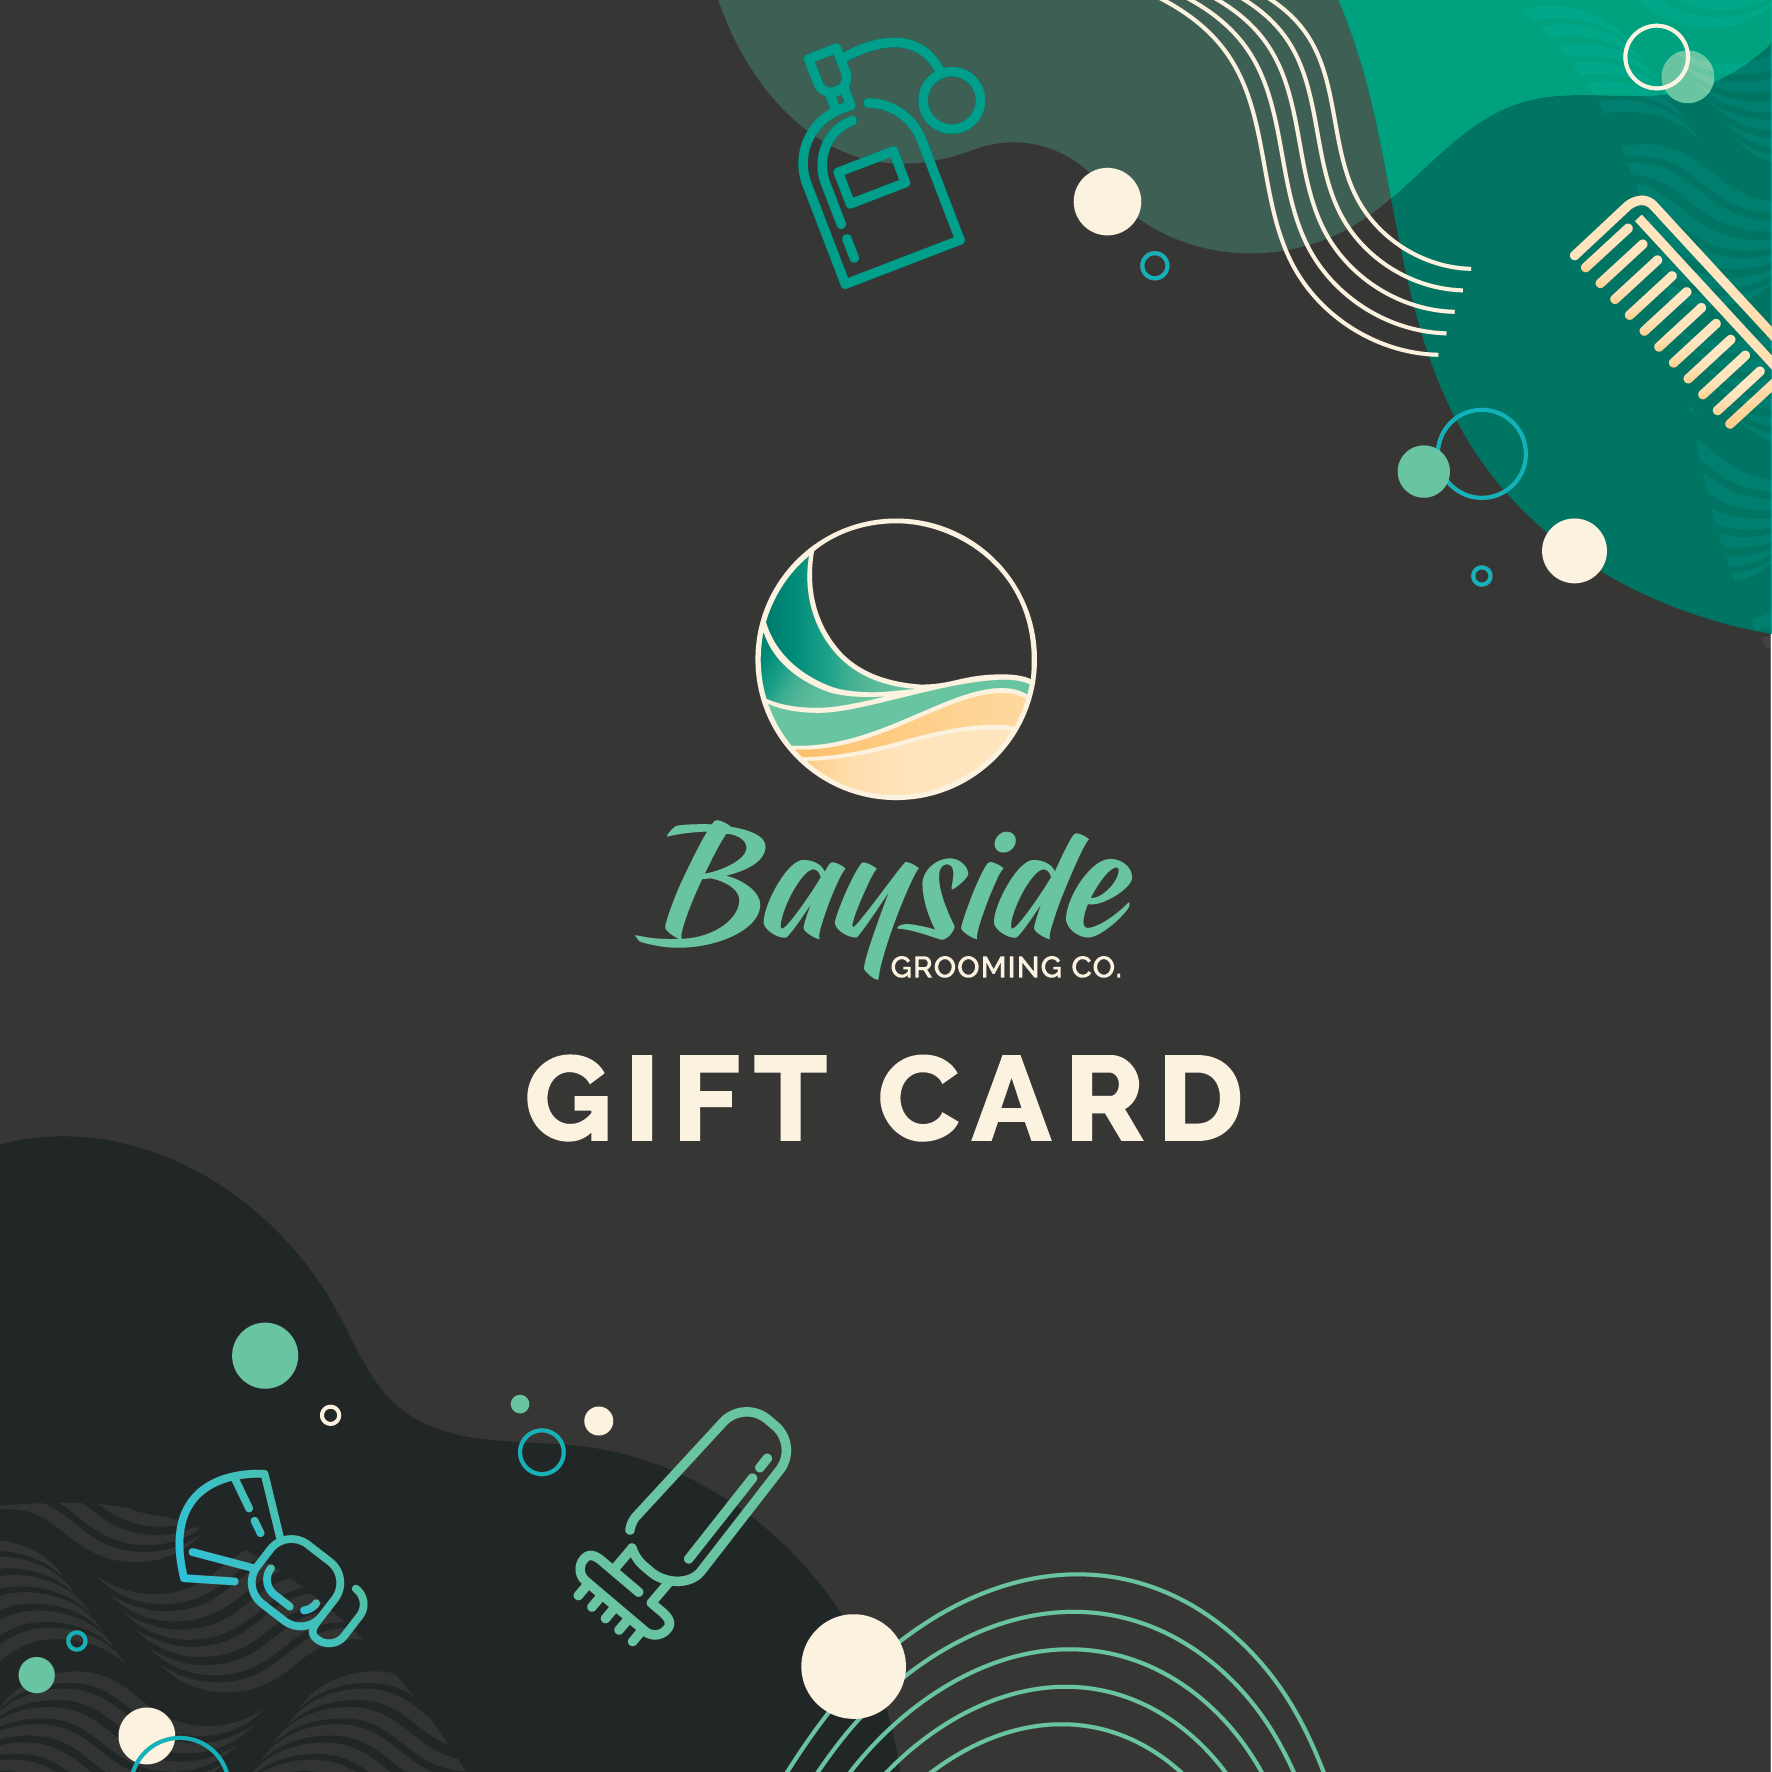 Hair Styling For Men. Bayside Grooming Co. Gift Card